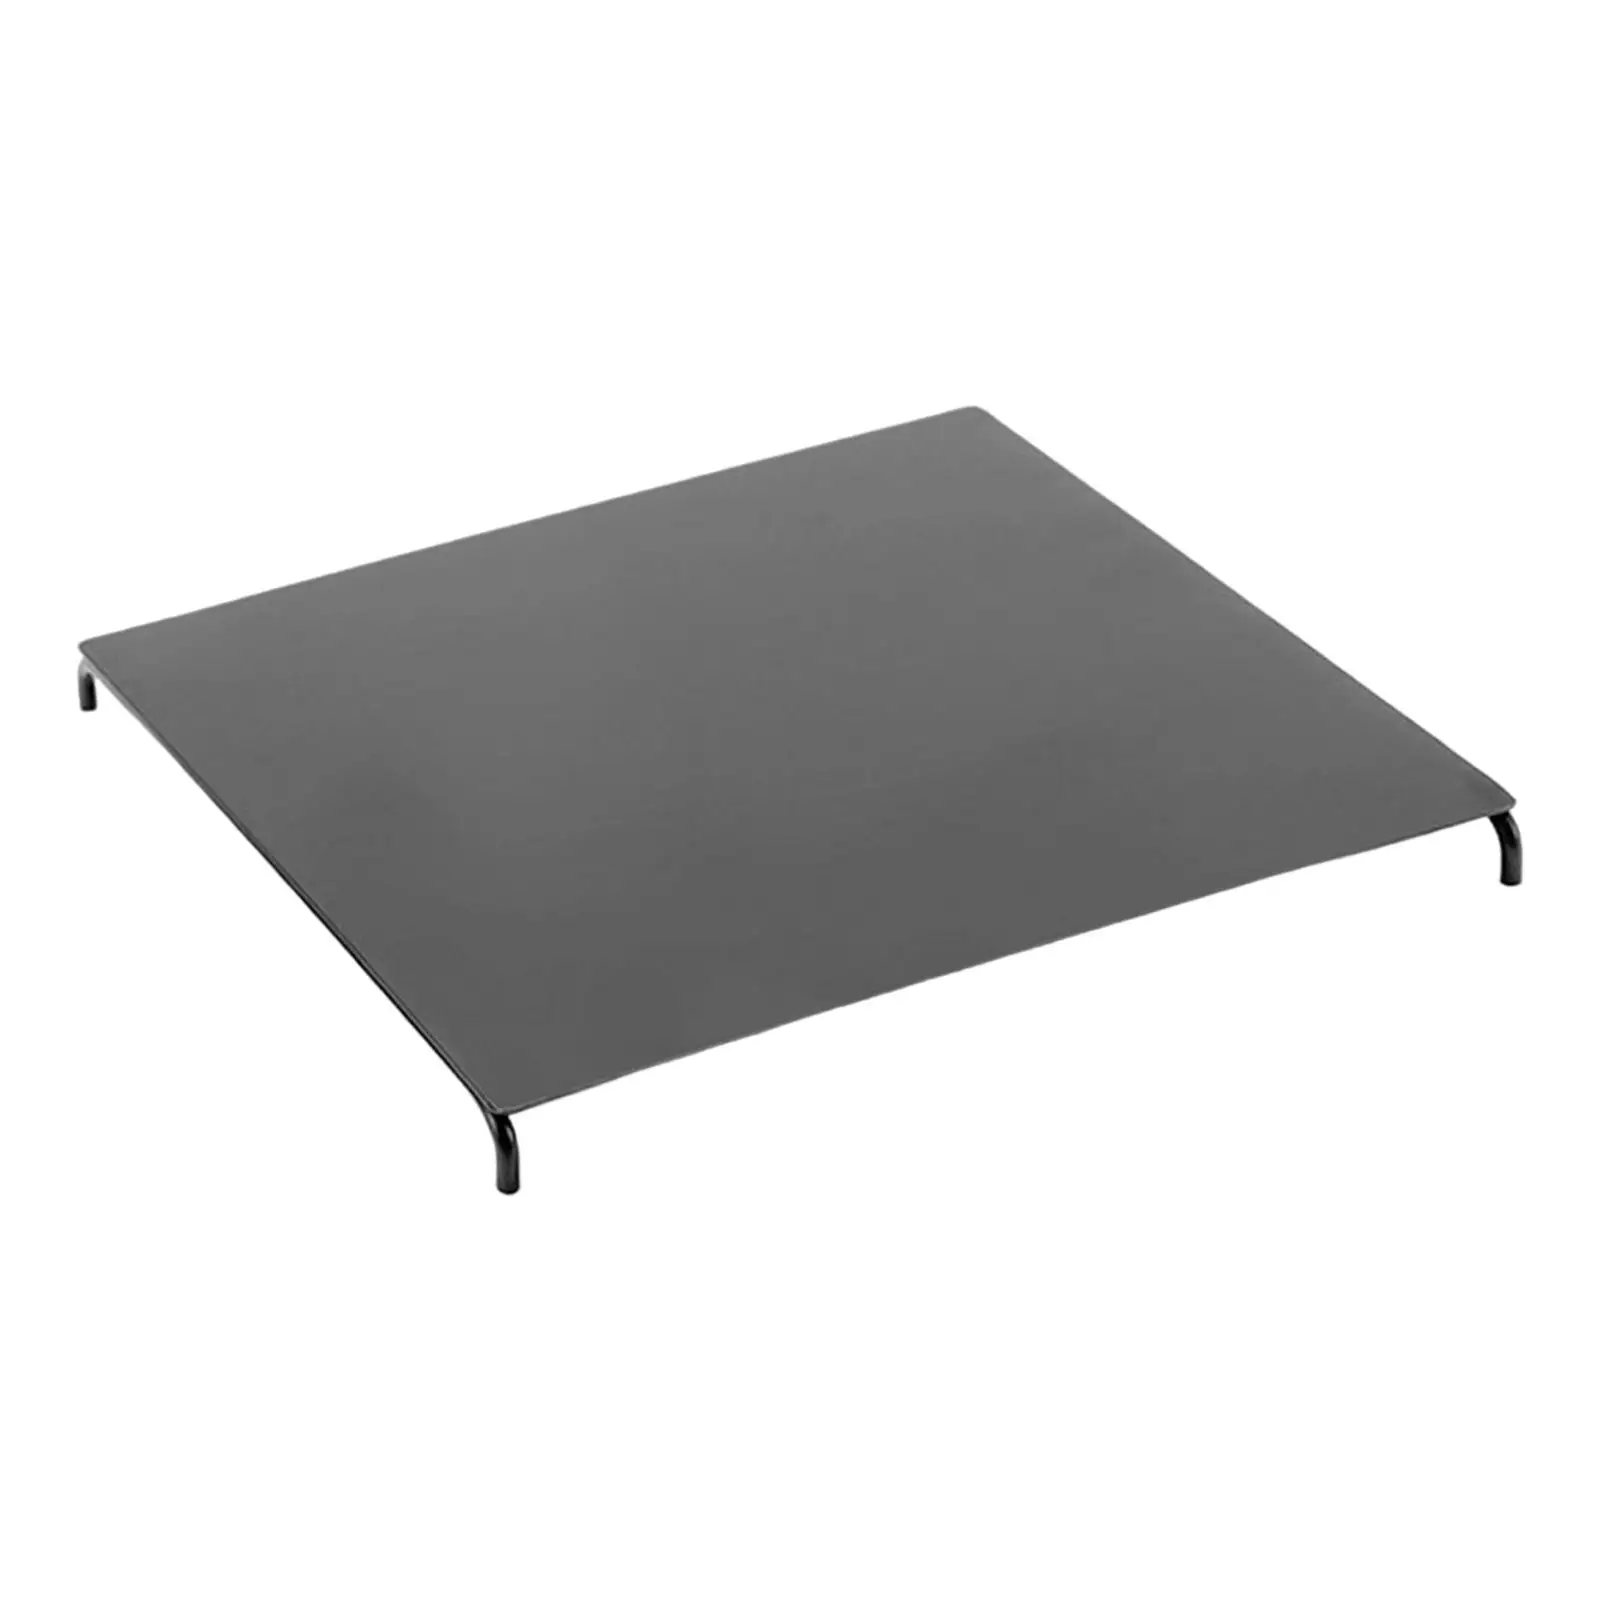 Camping table top, folding table, heat insulation, steel, 7.68